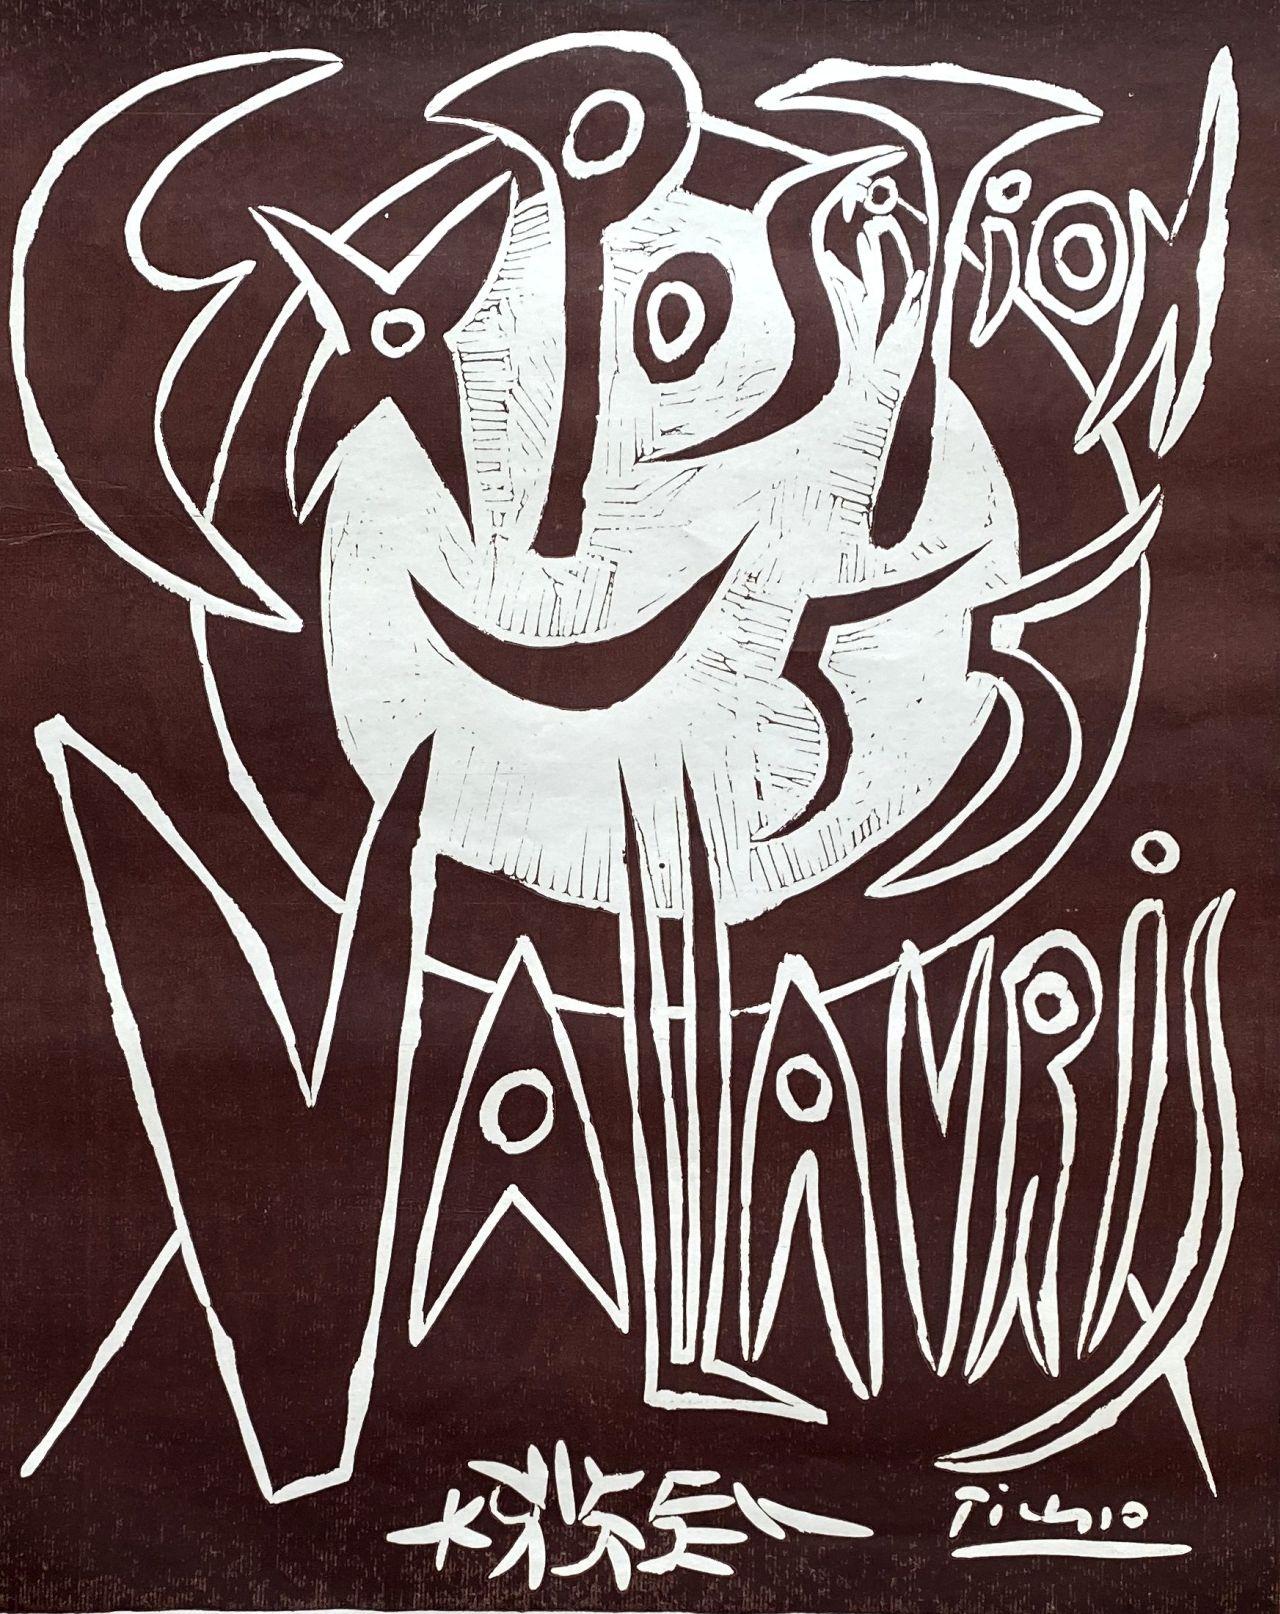 Exposition Vallauris 1955 - Tall Original Linocut Signed in the Plate  - Print by Pablo Picasso